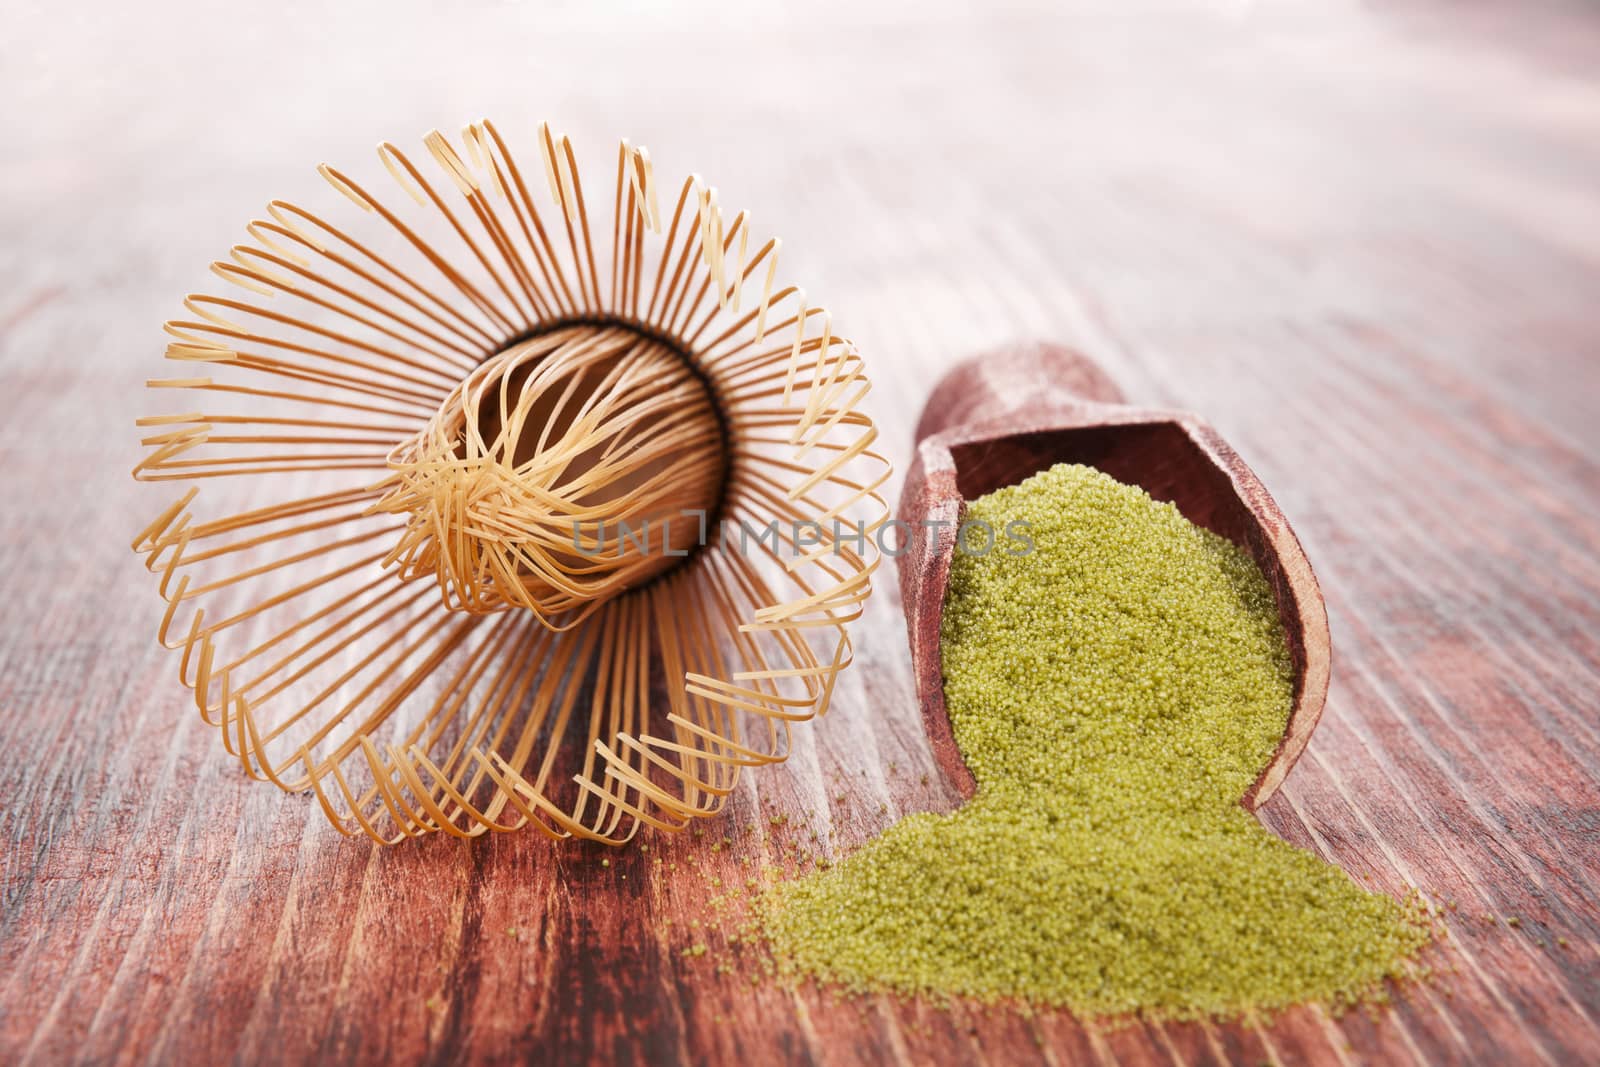 Matcha. Green powdered tea on wooden background with wooden scoop. Traditional healthy asian beverage.
